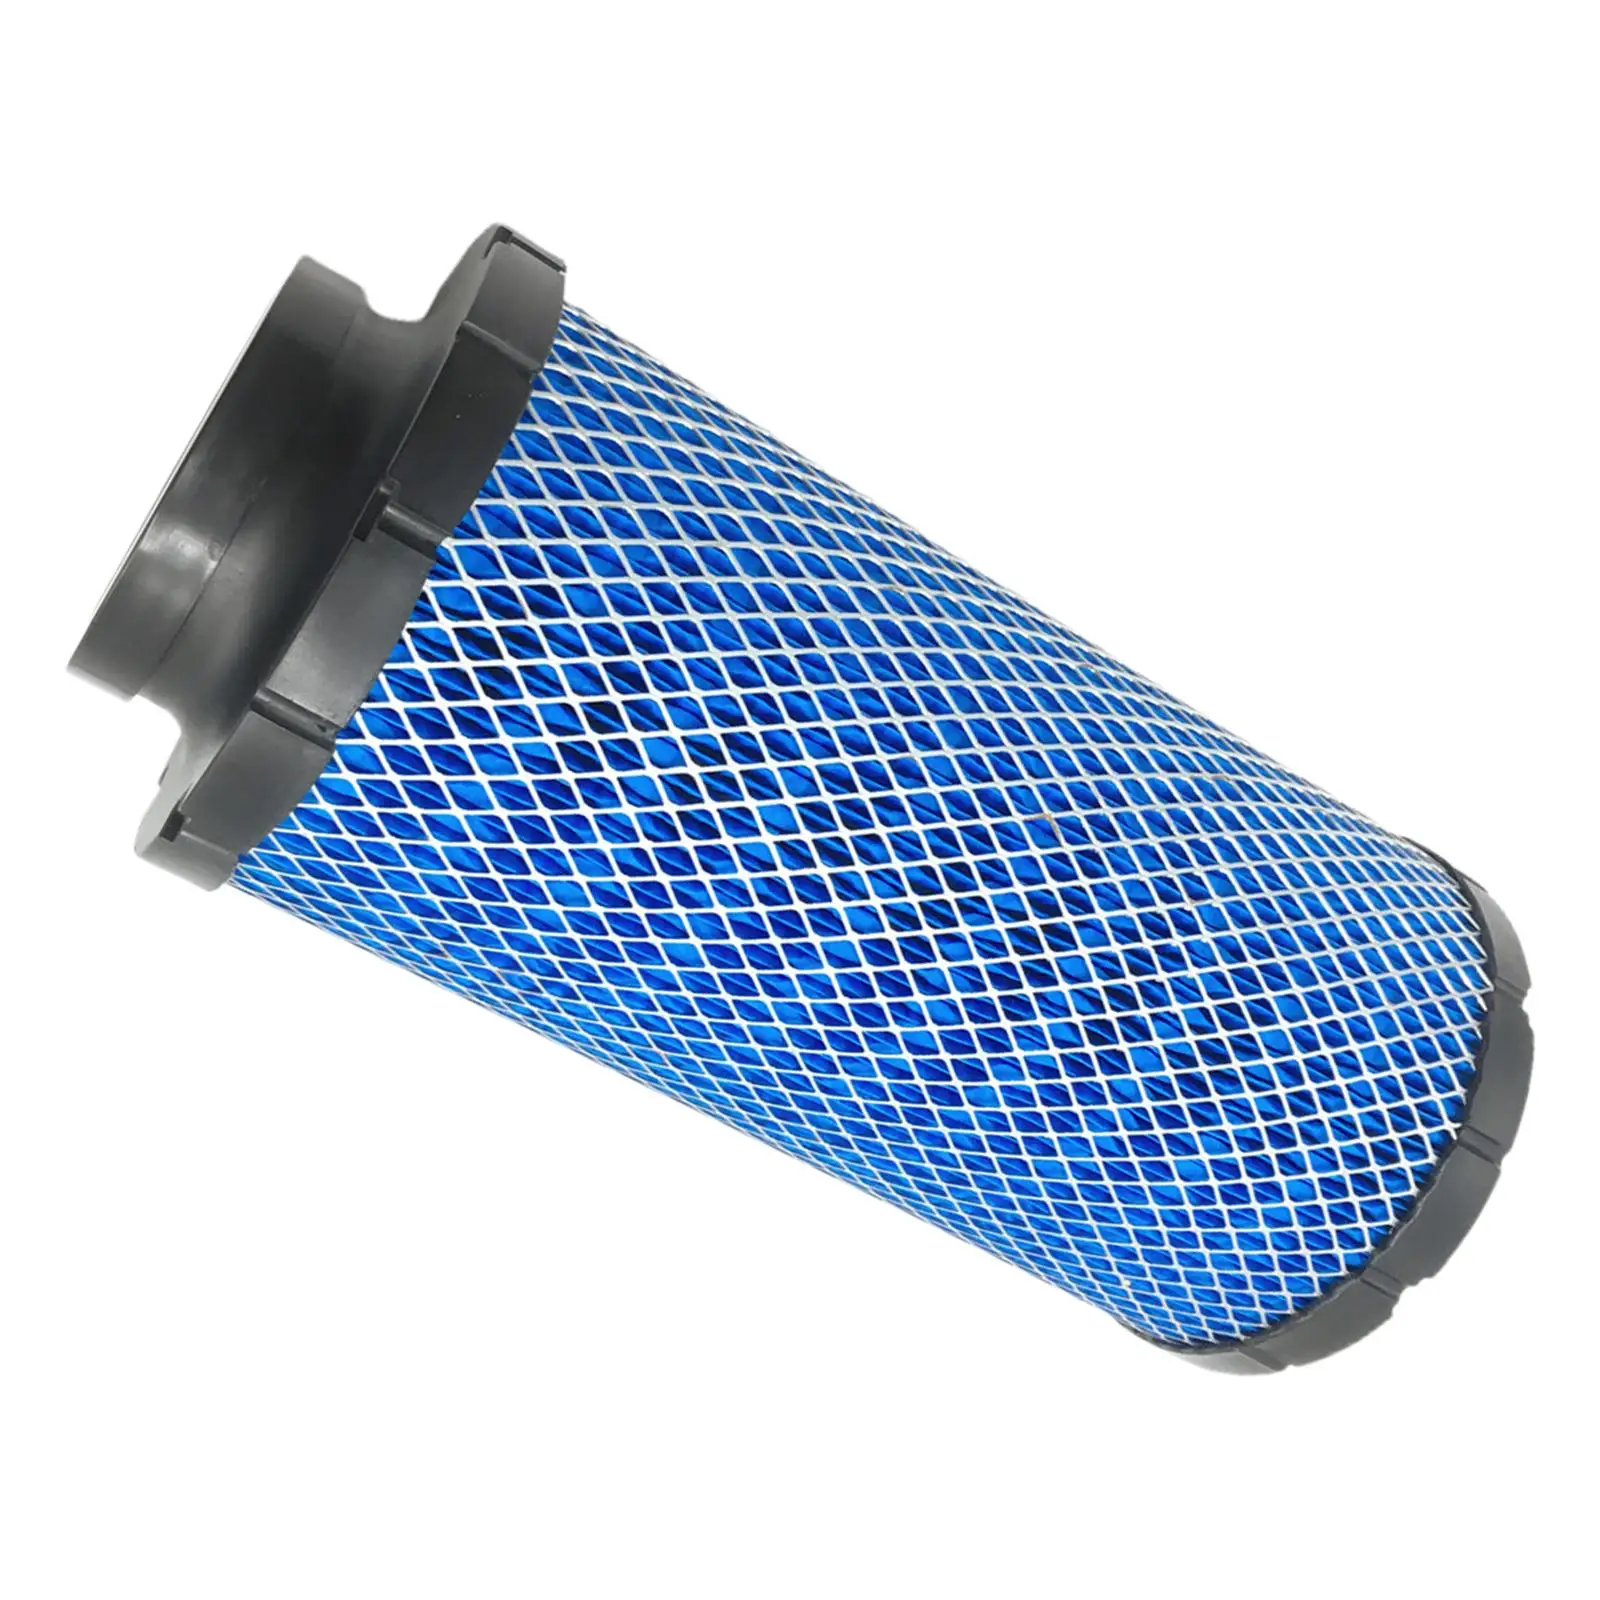 Air Filter Cleaner 1240957 Replacement for rzr 1000 Supplies